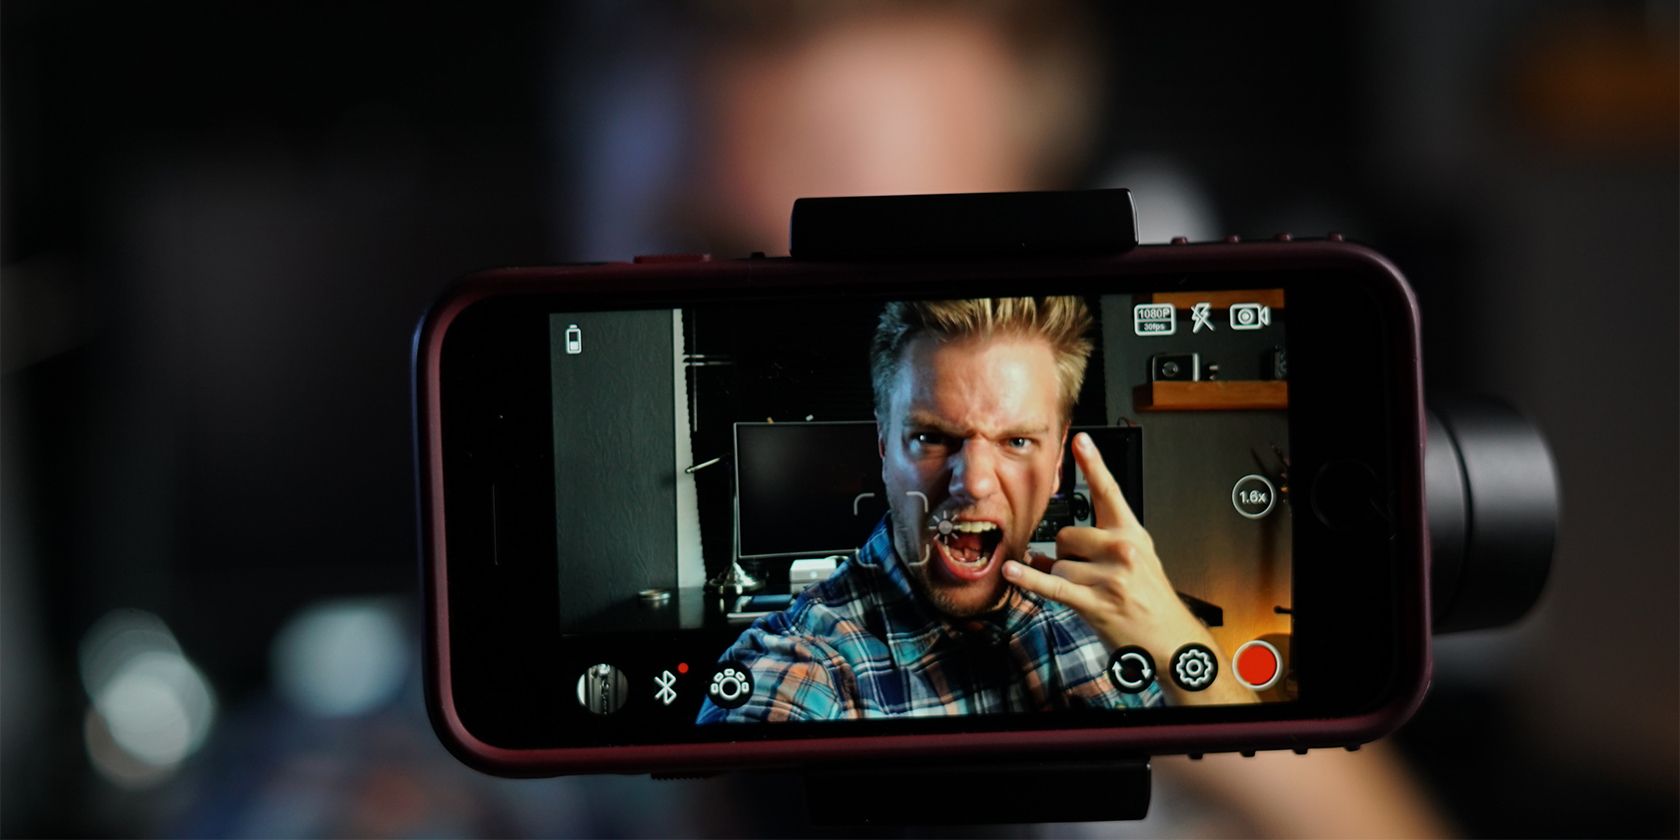 Image of a phone camera with man taking photo.